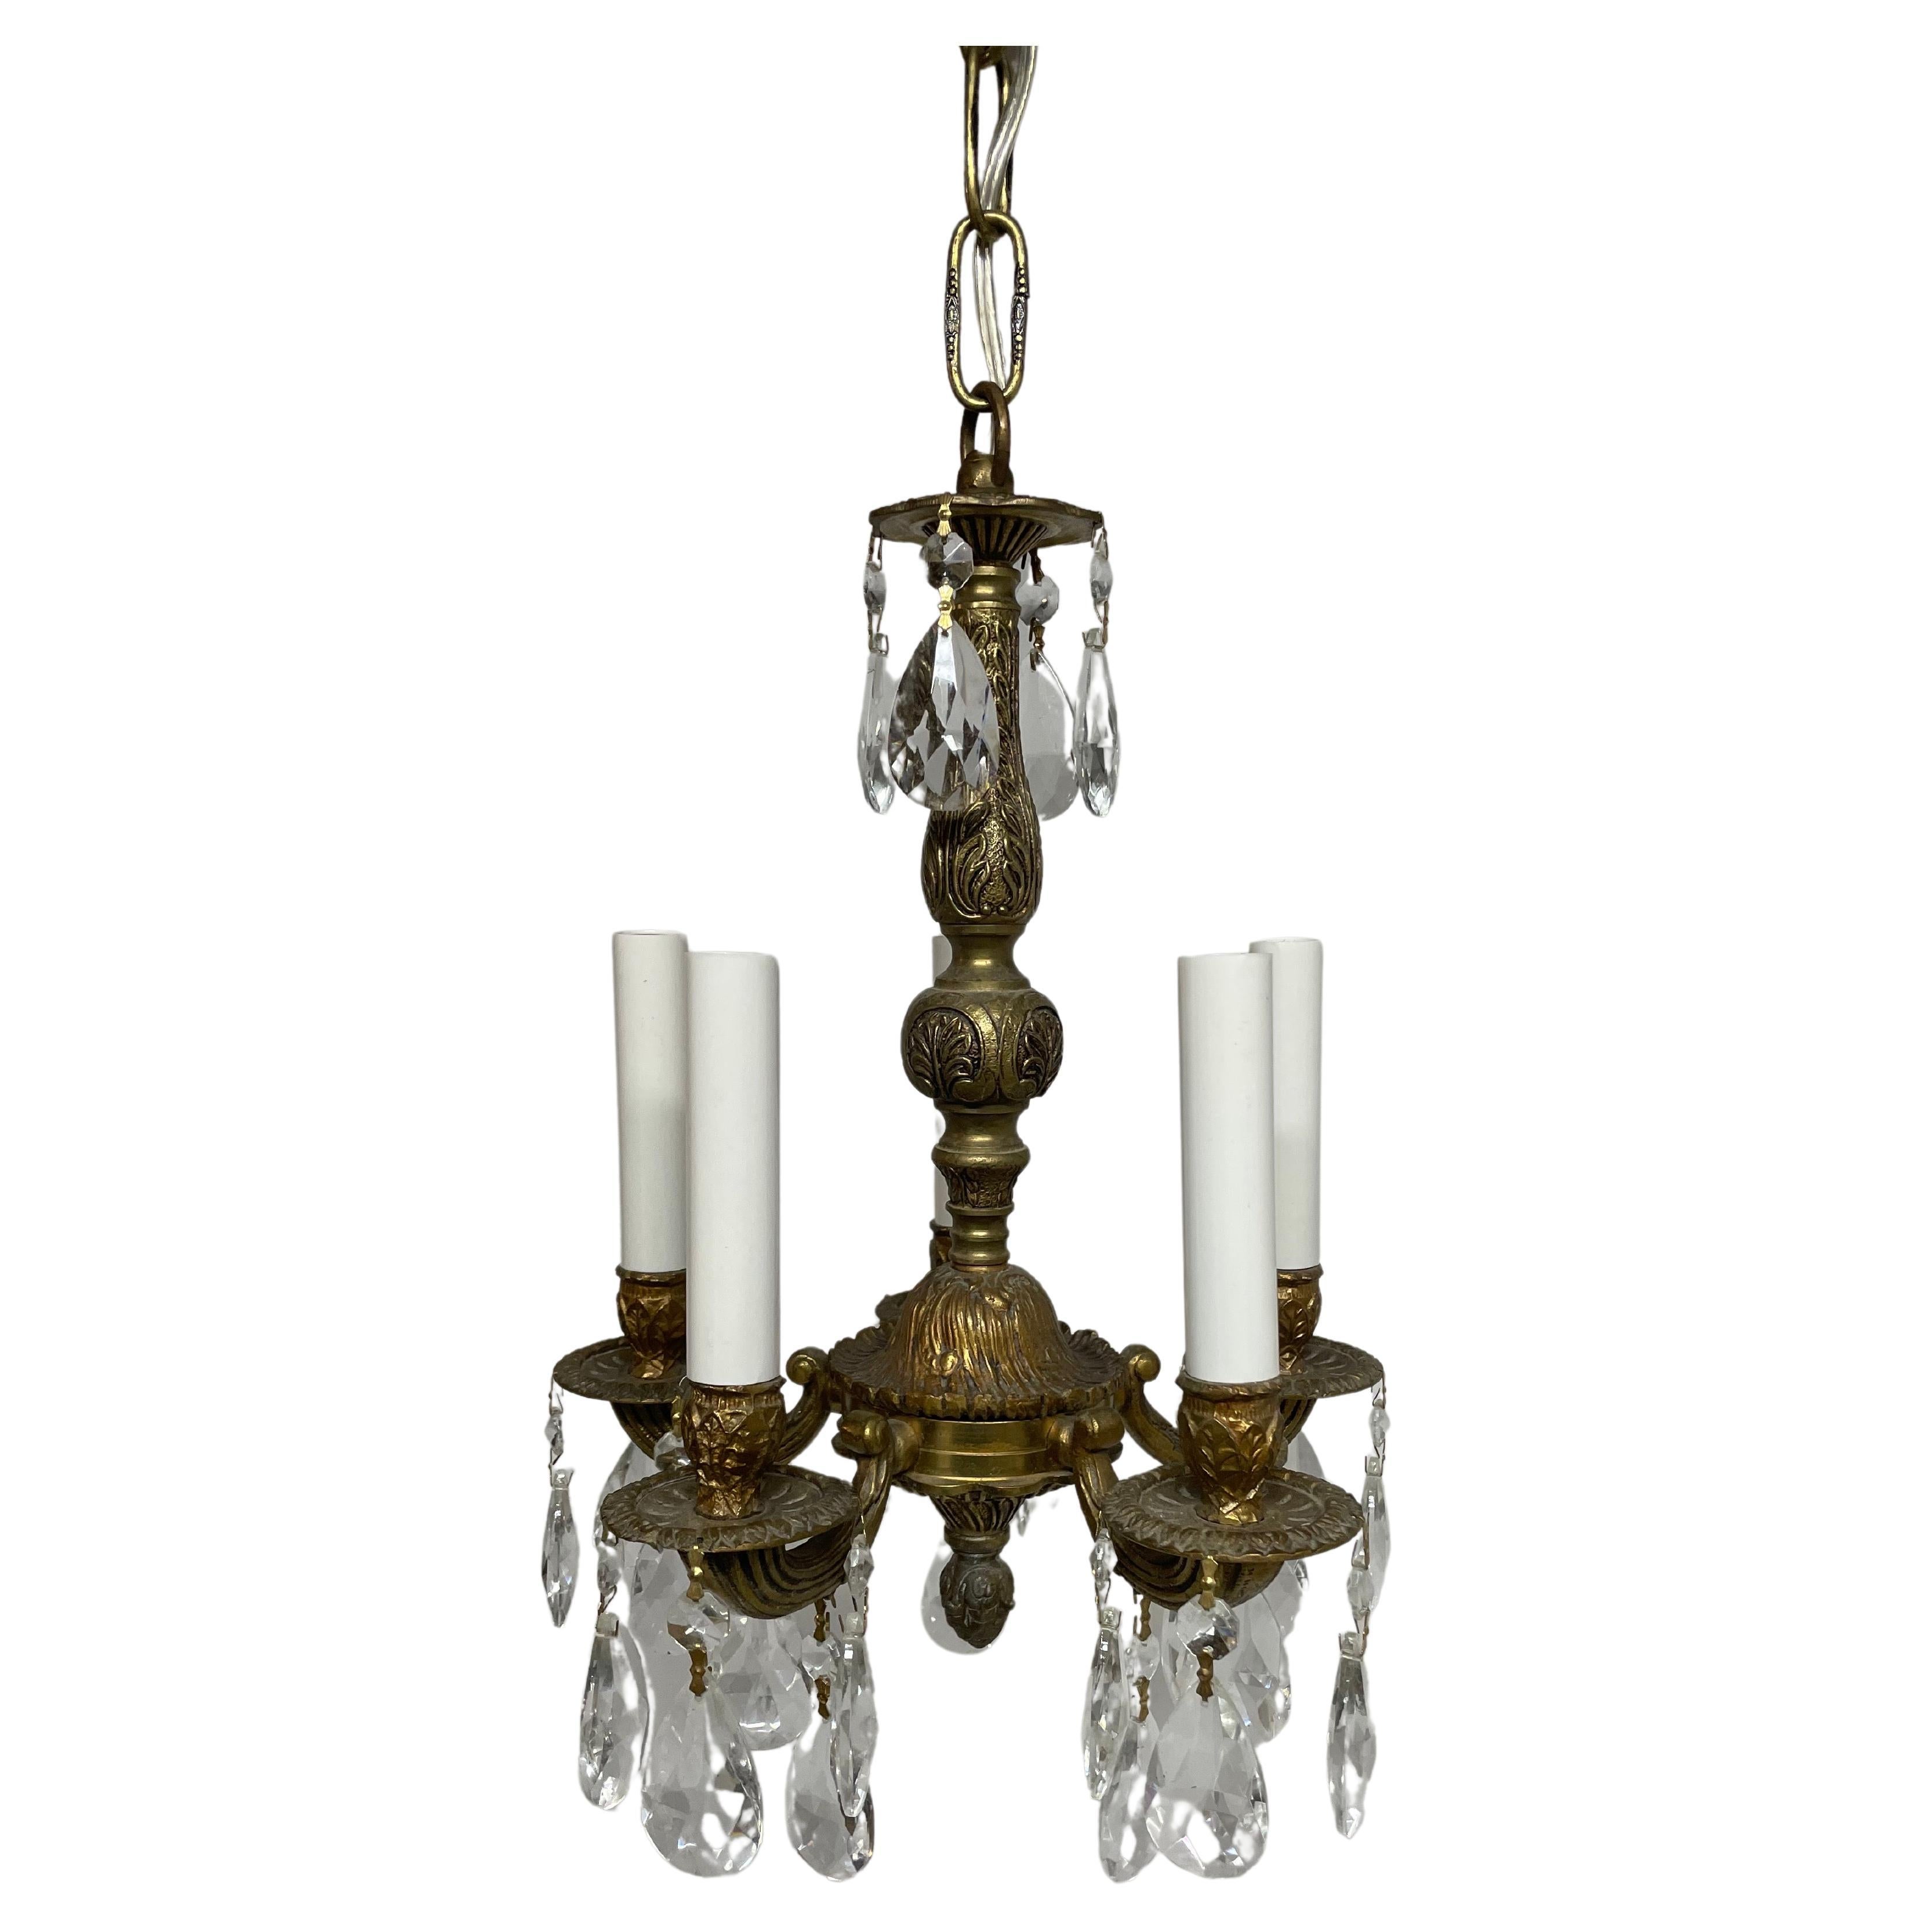 Rococo Revival Petit French Style Brass and Crystal Chandelier For Sale